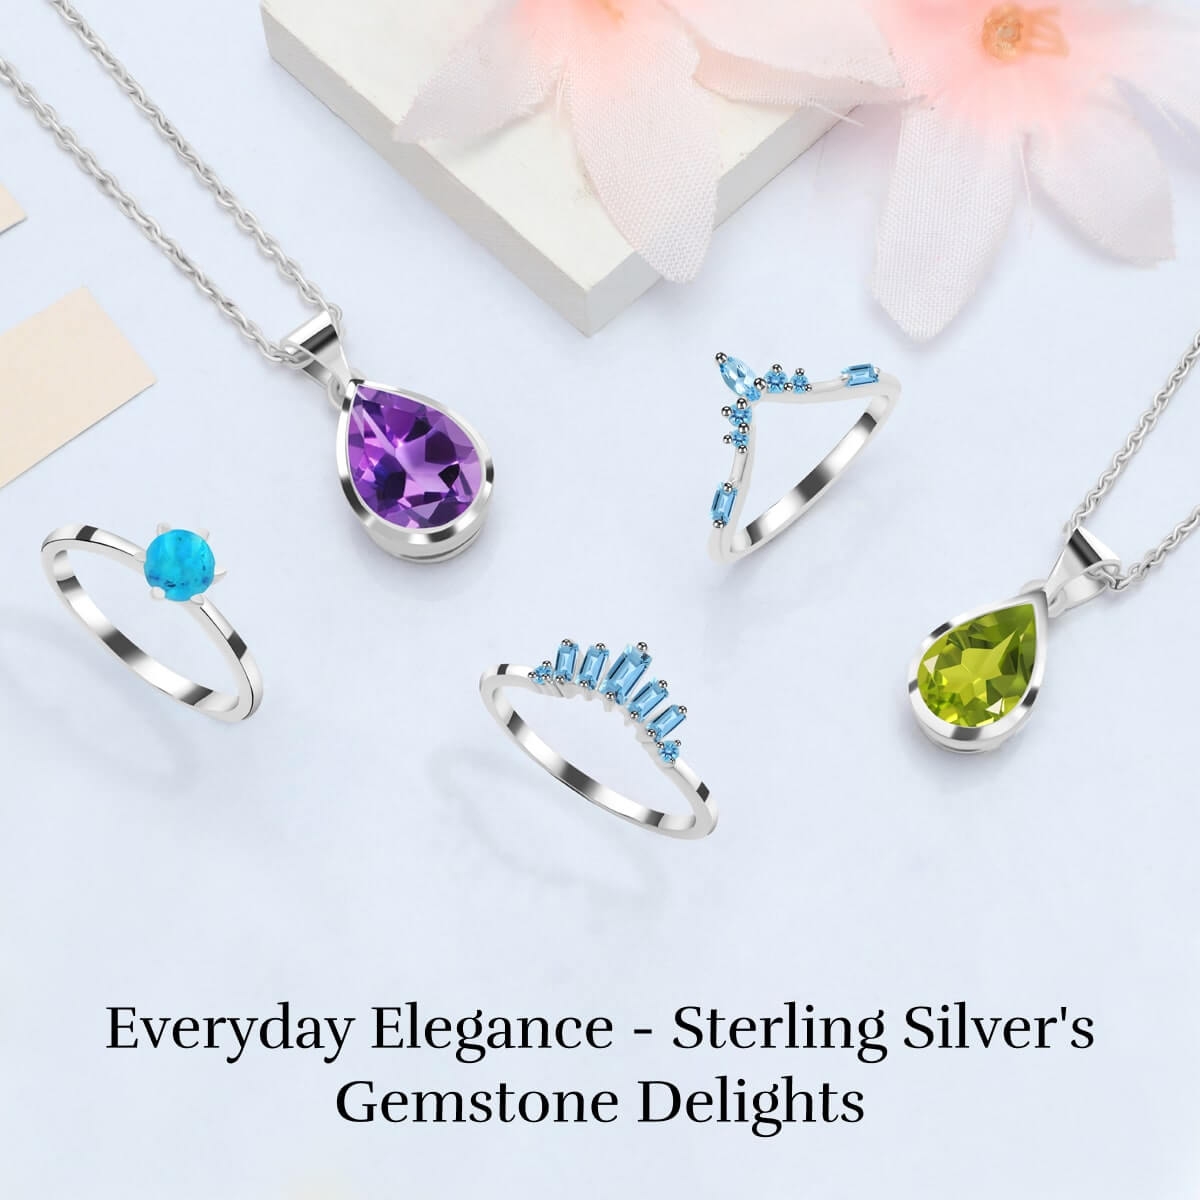 Top Trending Gemstone that Sterling Silver Jewelry Women Can Wear On Daily Basis